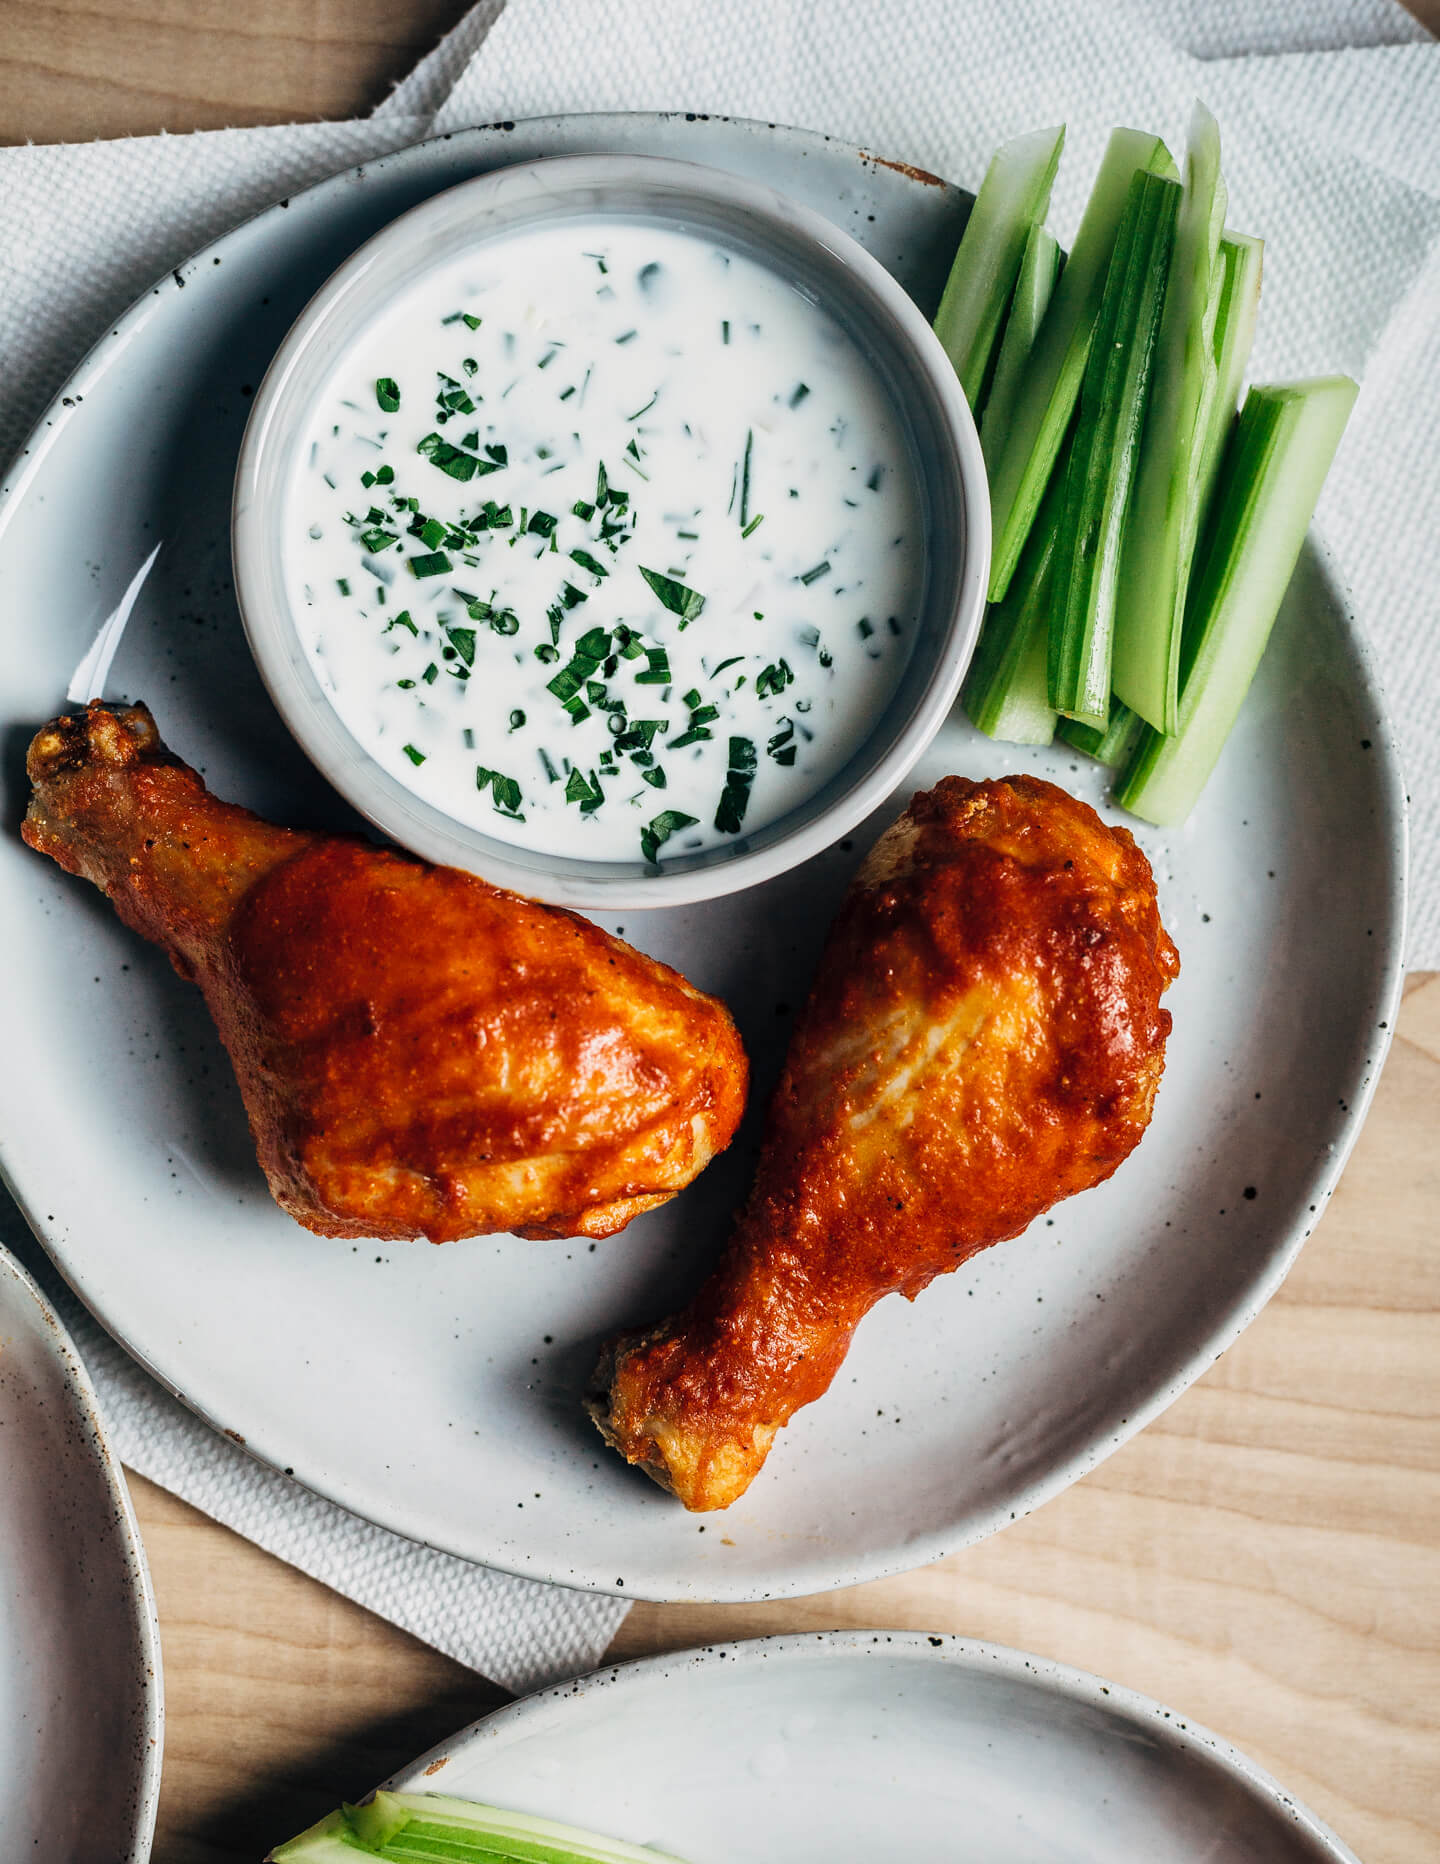 Hearty oven-roasted Buffalo chicken drumsticks with buttermilk ranch dressing and celery sticks are the perfect meal for spring and summer celebrations and gatherings.